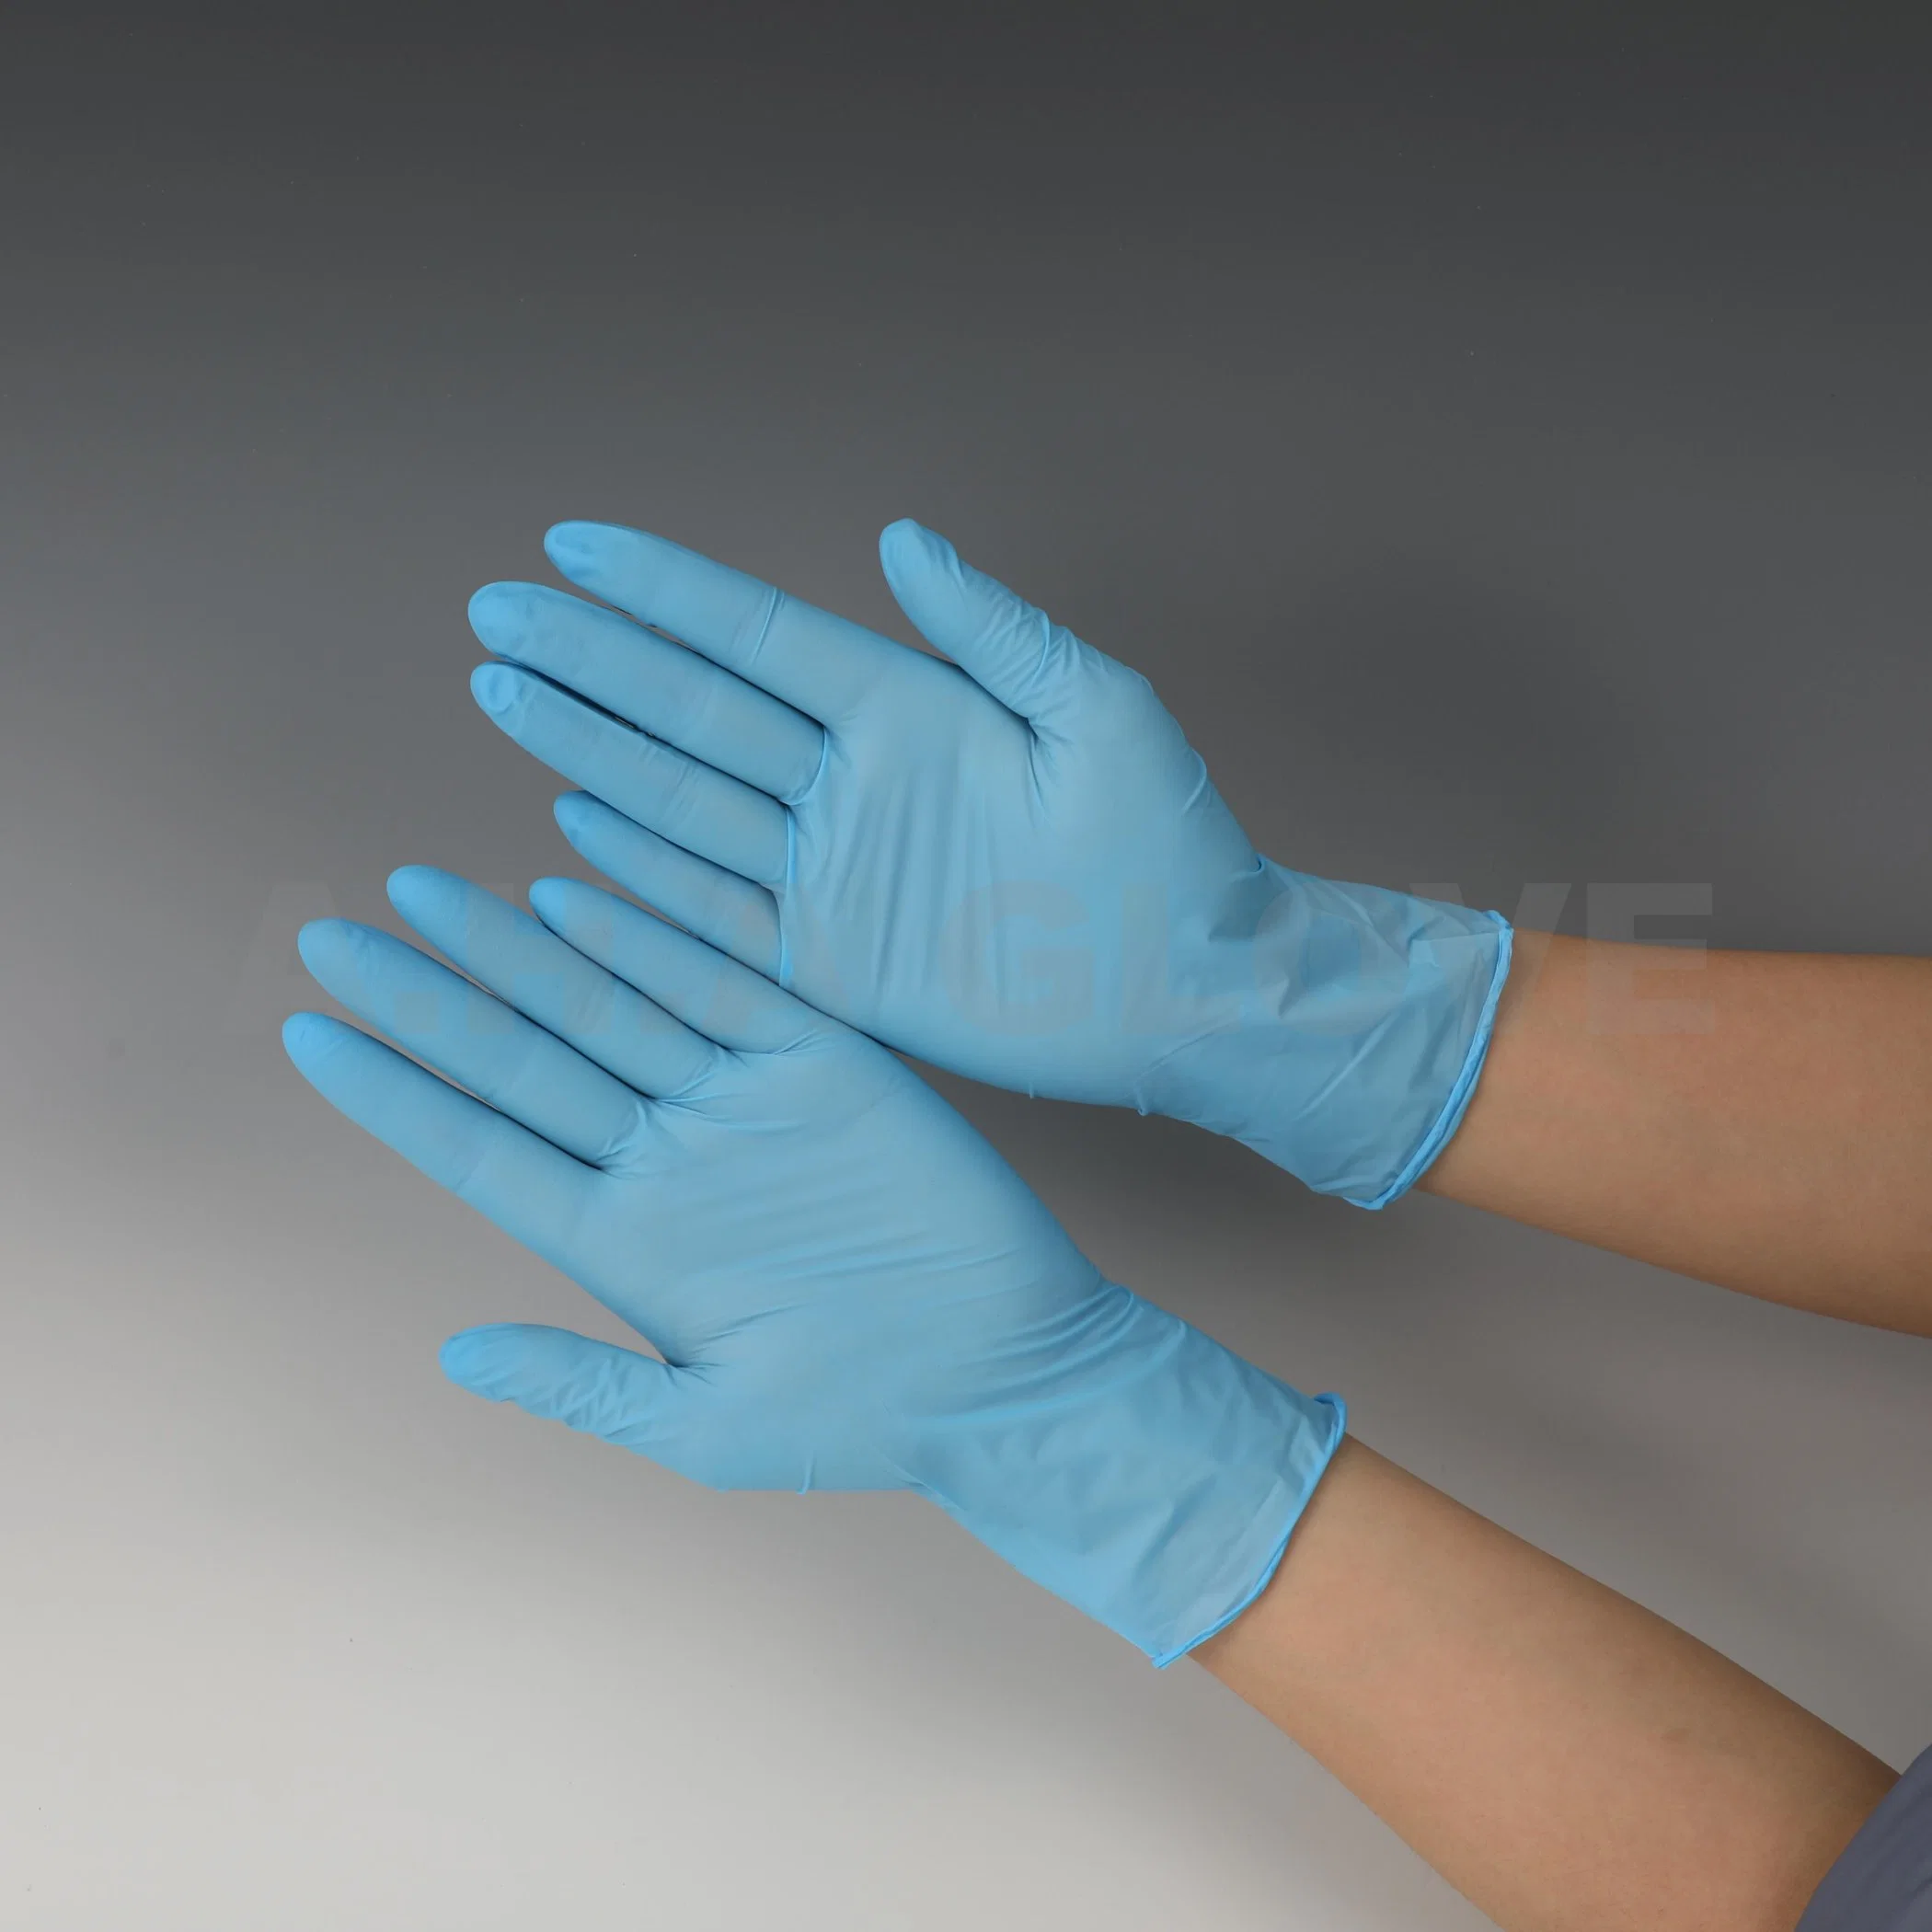 Disposable Safety Protective Face Mask Vinyl Gloves Latex Examination Gloves Nitrile Gloves Surgical Gloves Medical Gloves for Medical Examination